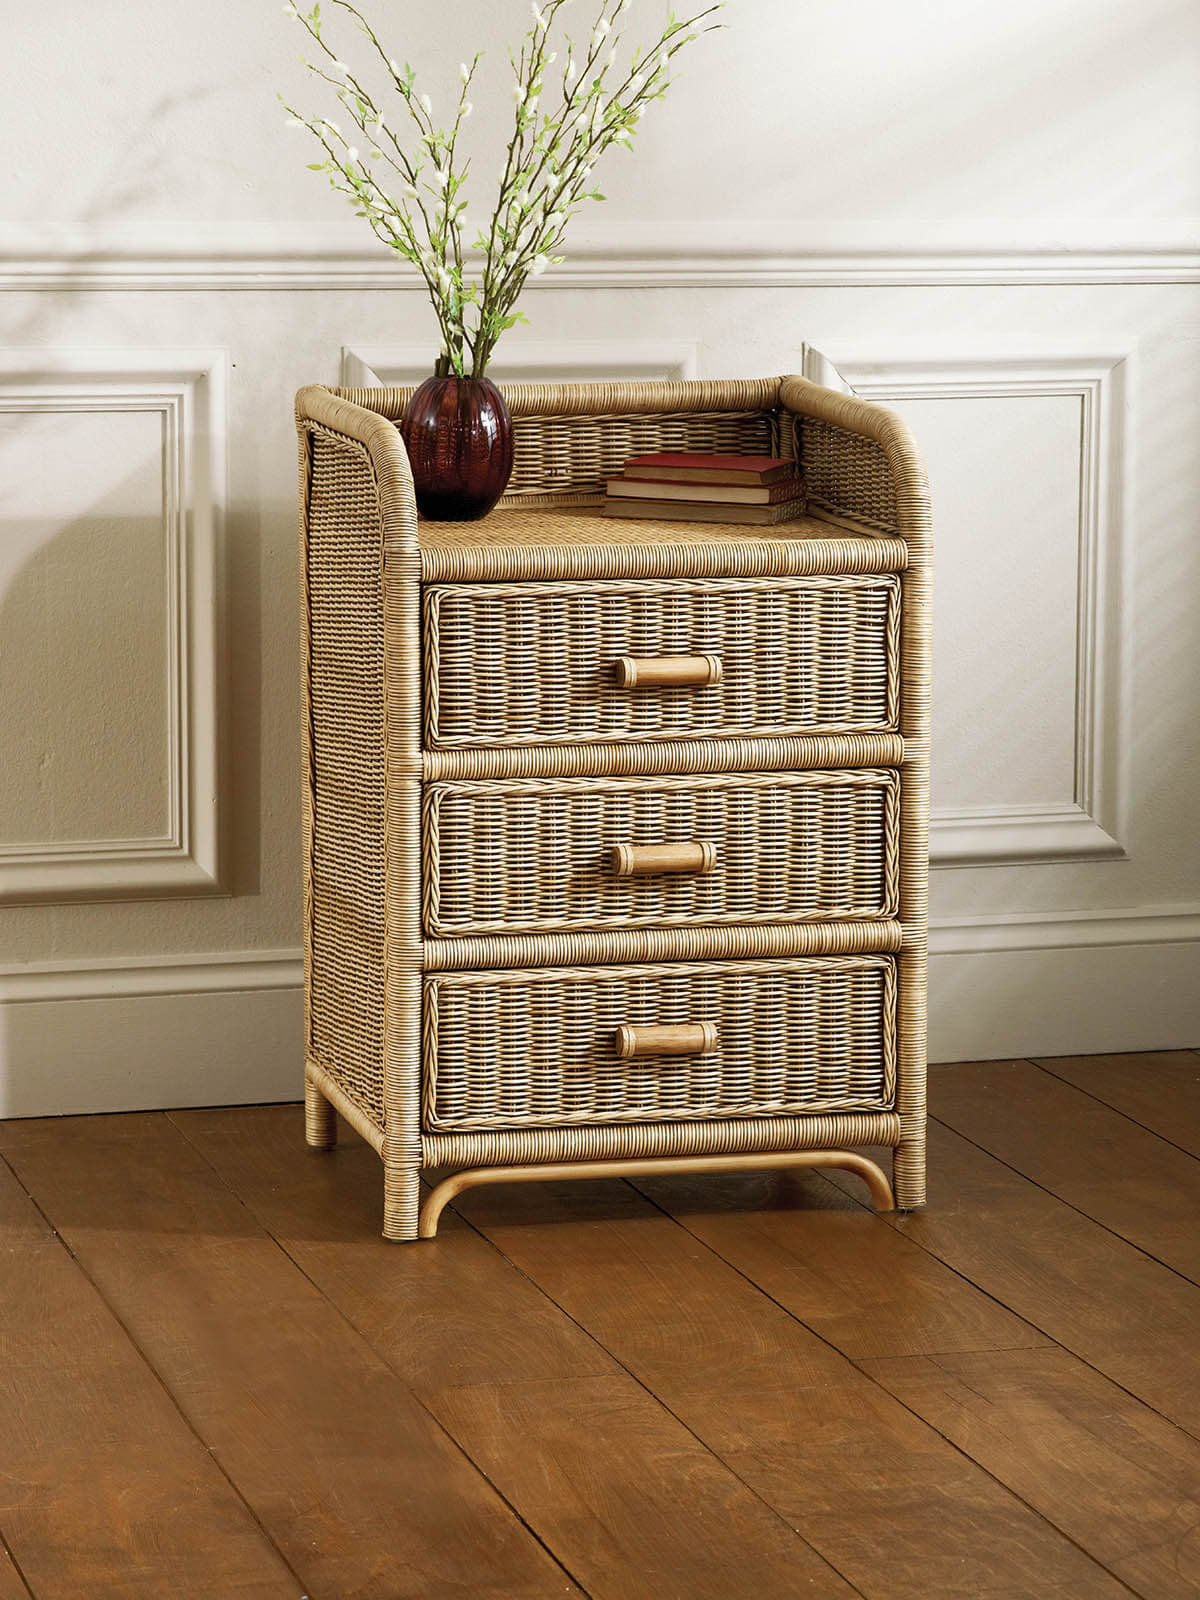 Showing image for Cane chest - 3 drawer